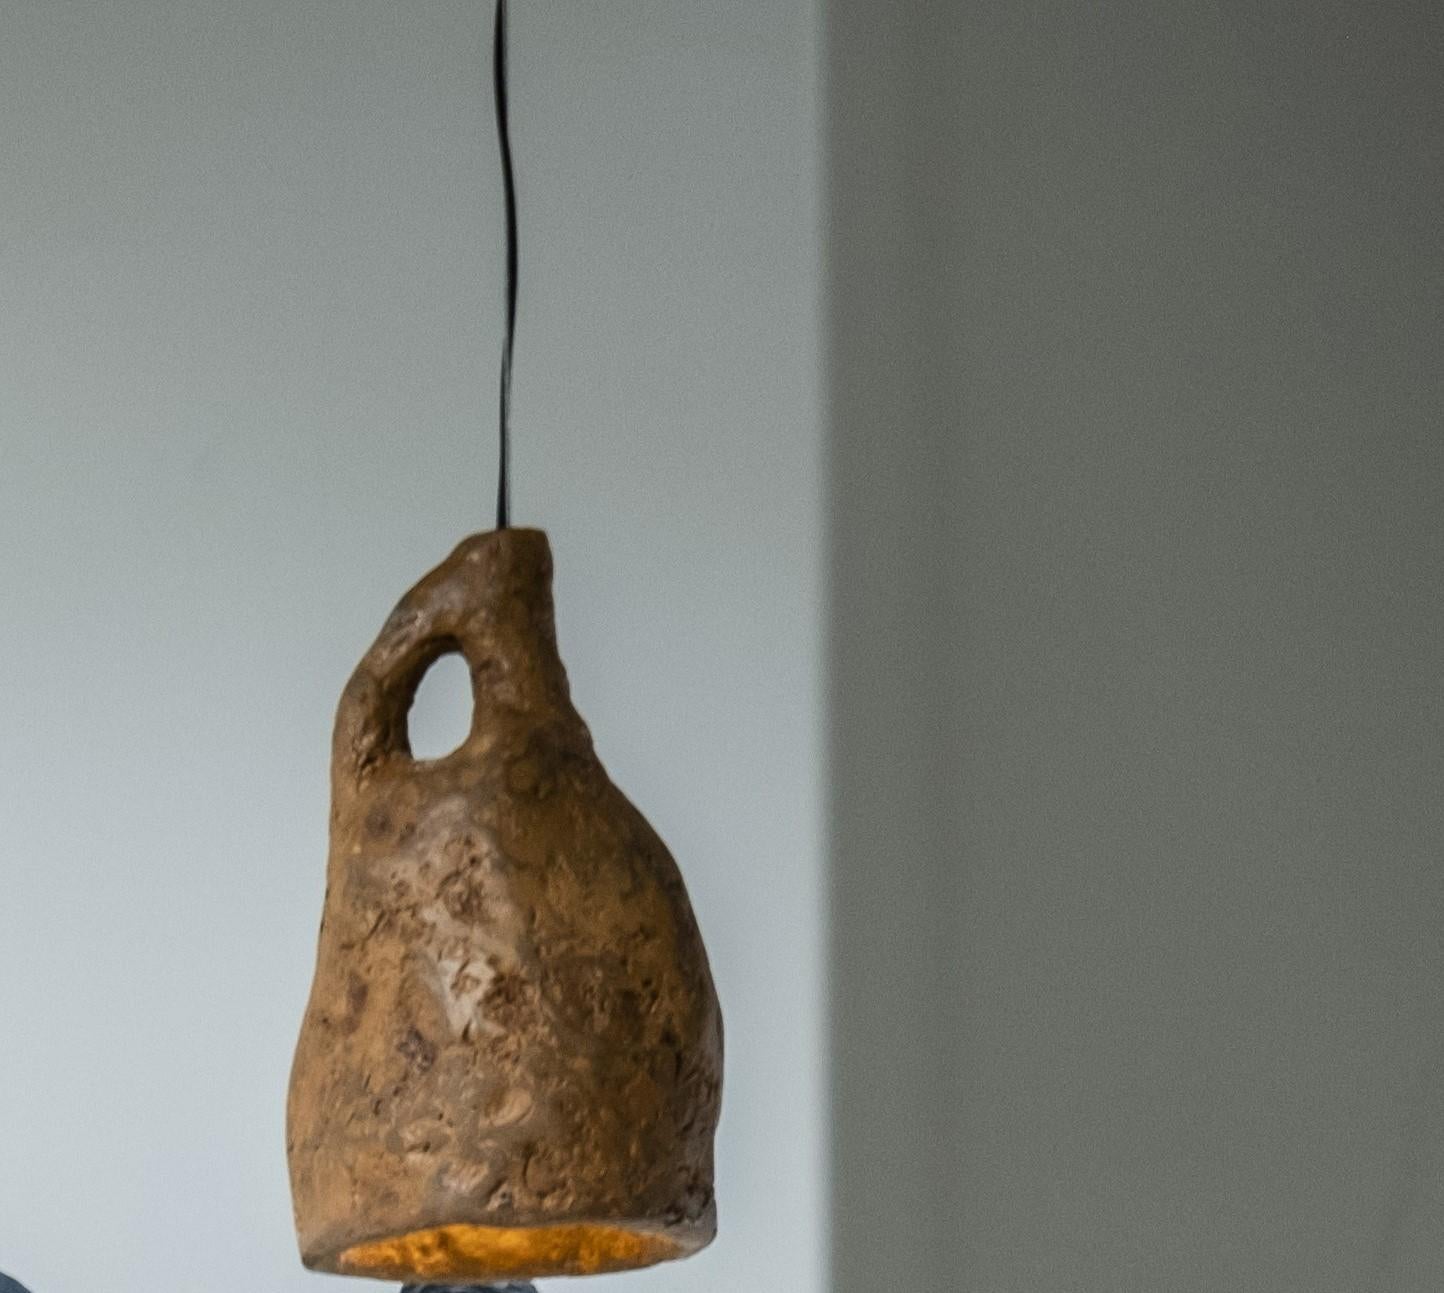 Dual Terra lamp by Willem Van Hooff
Dimensions: W 27 x D 27 x H 45 cm
Materials: Air Dry Clay

Willem van Hooff is a designer based in Eindhoven. He is a driven builder, were he likes to see design as his tool to express an remember stories. He